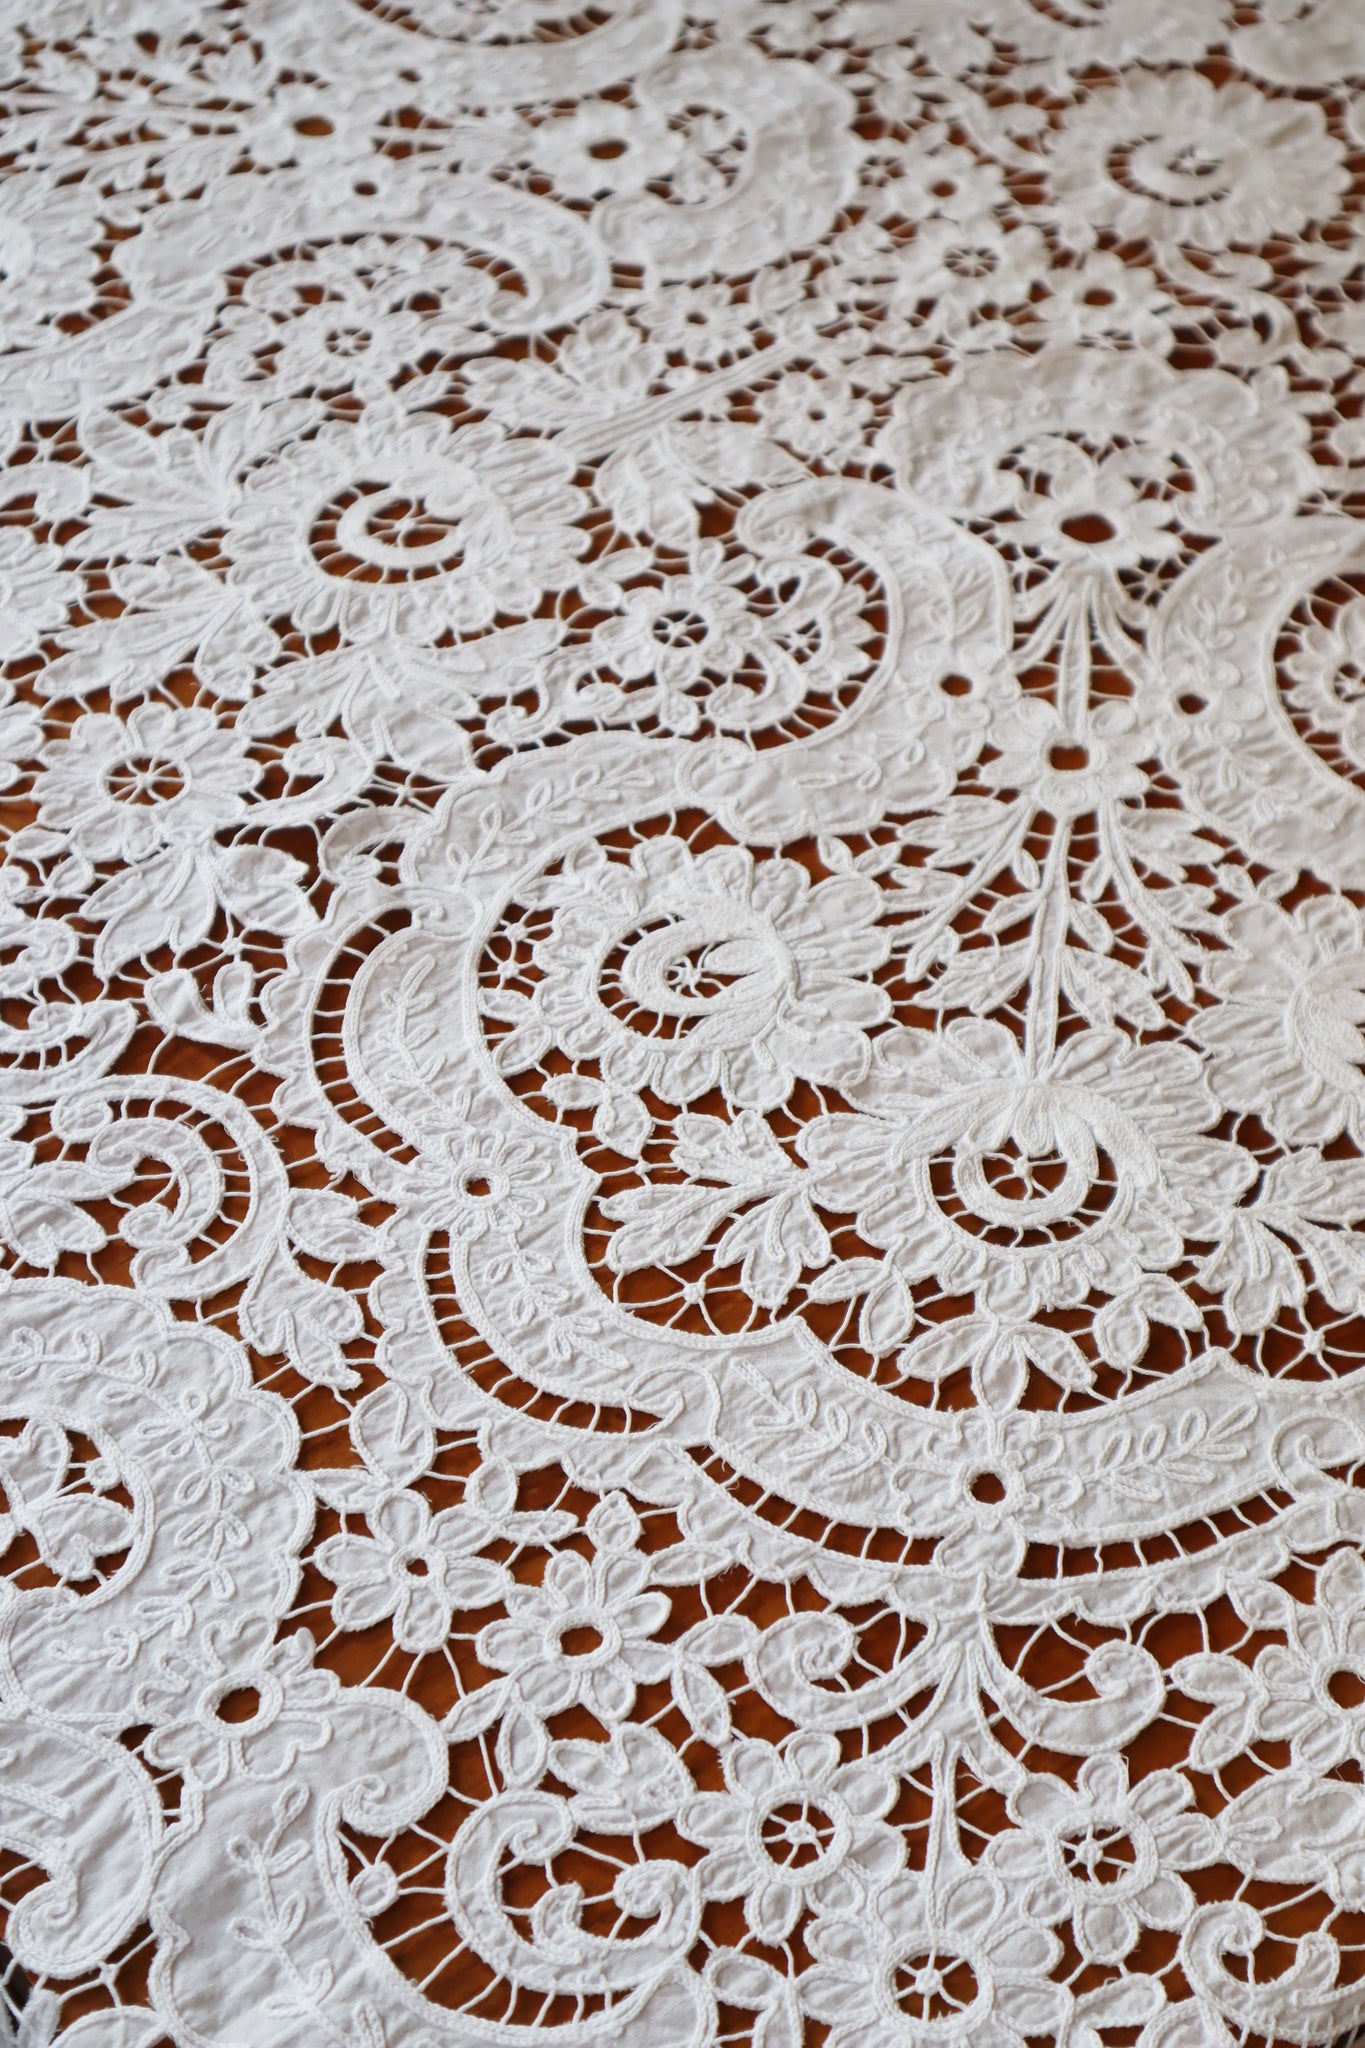 60s Beautiful Tablecloth Made Of Embroidered Chain Stitch Floral Lace